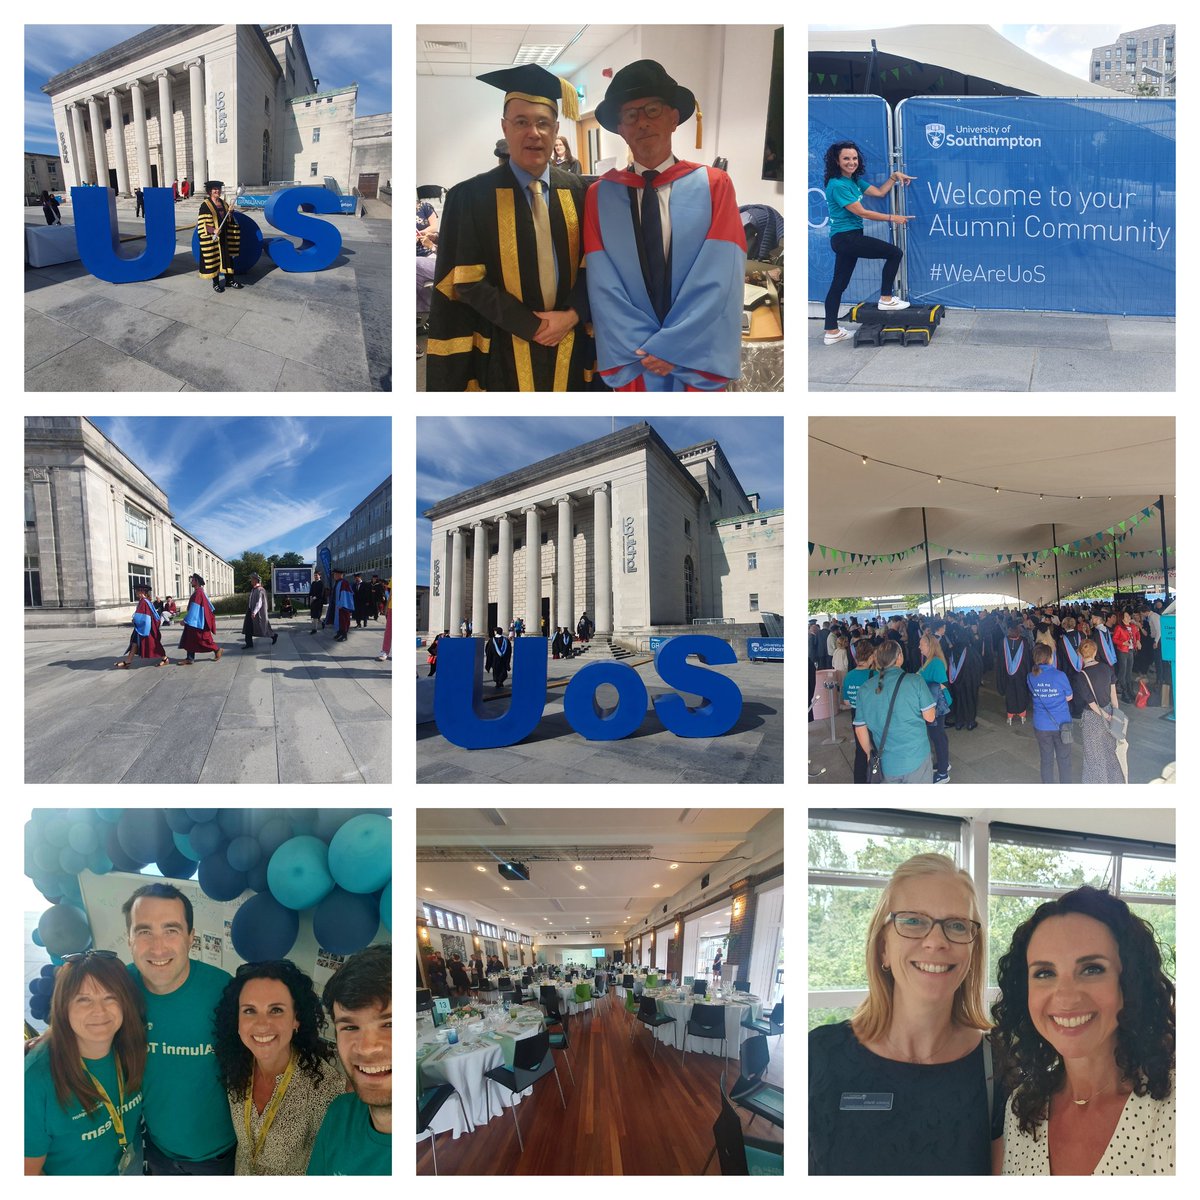 Well, that's me done for this year's @unisouthampton #graduation2023 What a brilliant few weeks. So much hard work from many amazing colleagues to create wonderful celebrations for students, families and Hon Grads. The warmest welcome to your @SotonAlumni community 😊 #WeareUoS